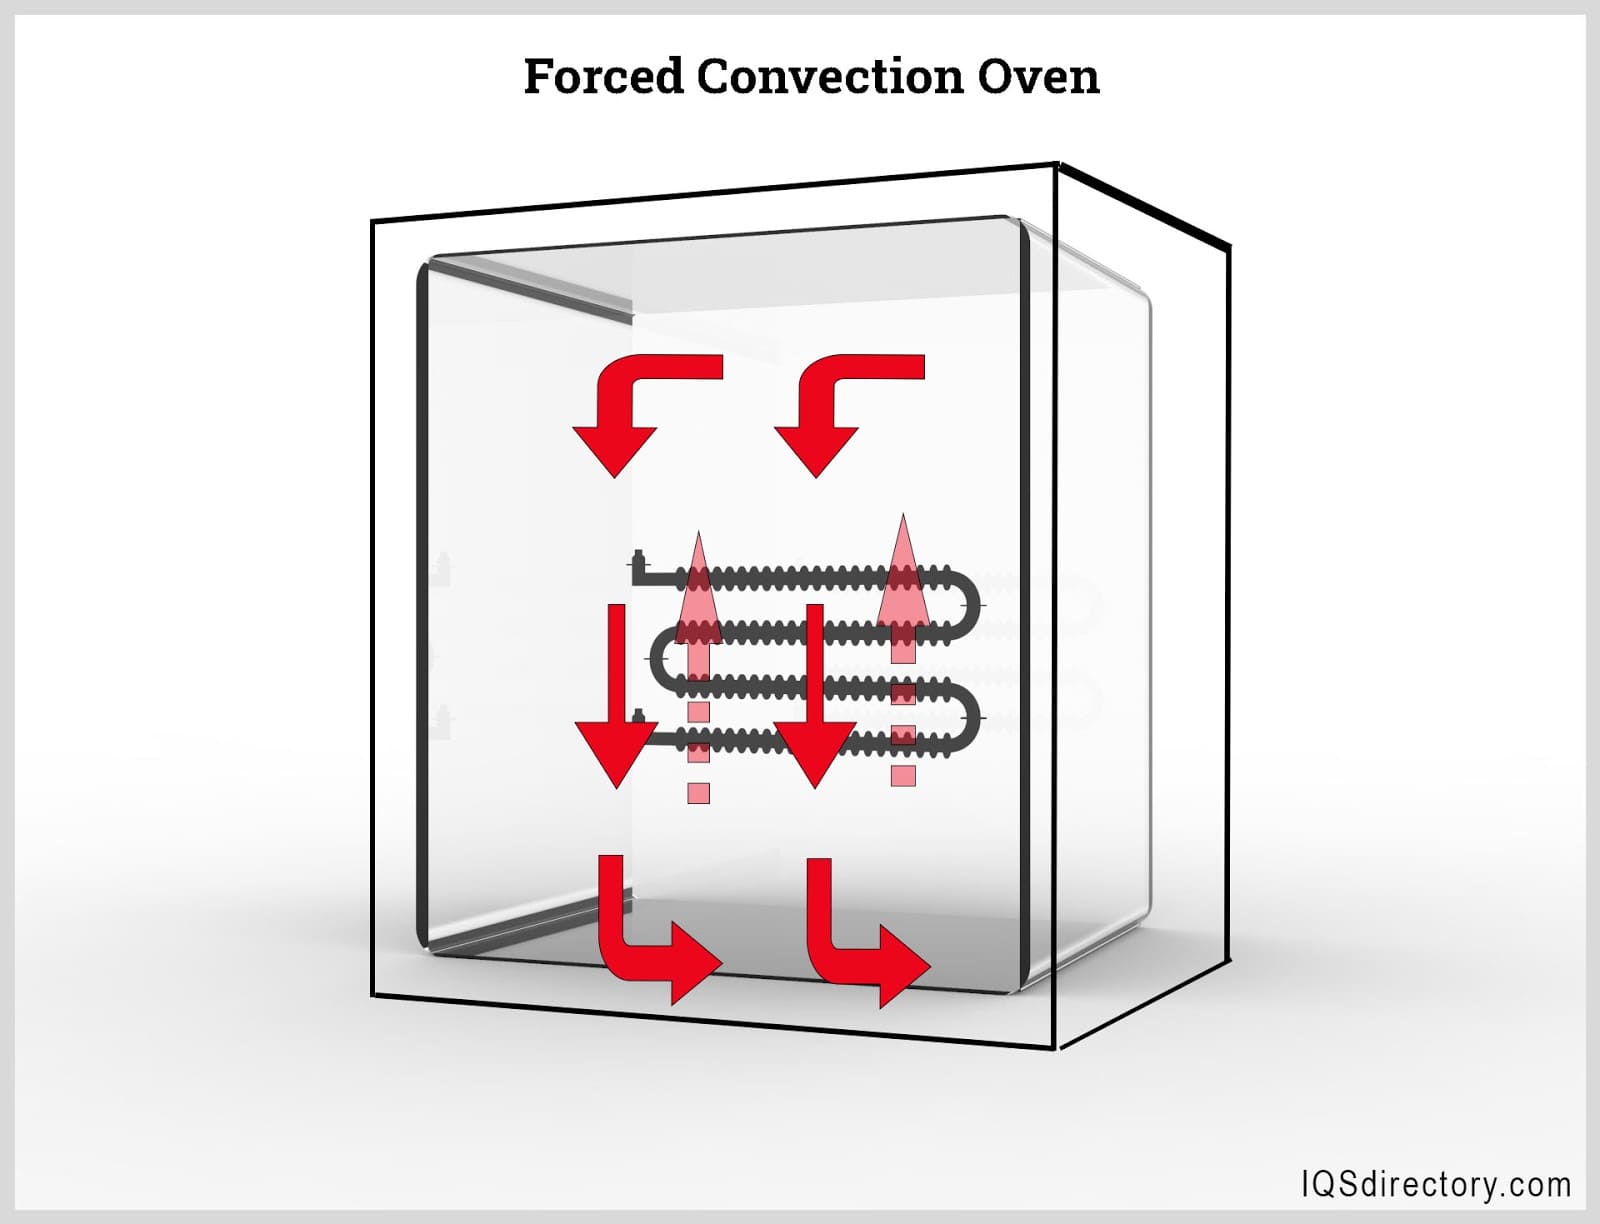 https://www.iqsdirectory.com/articles/industrial-oven/forced-covection.jpg